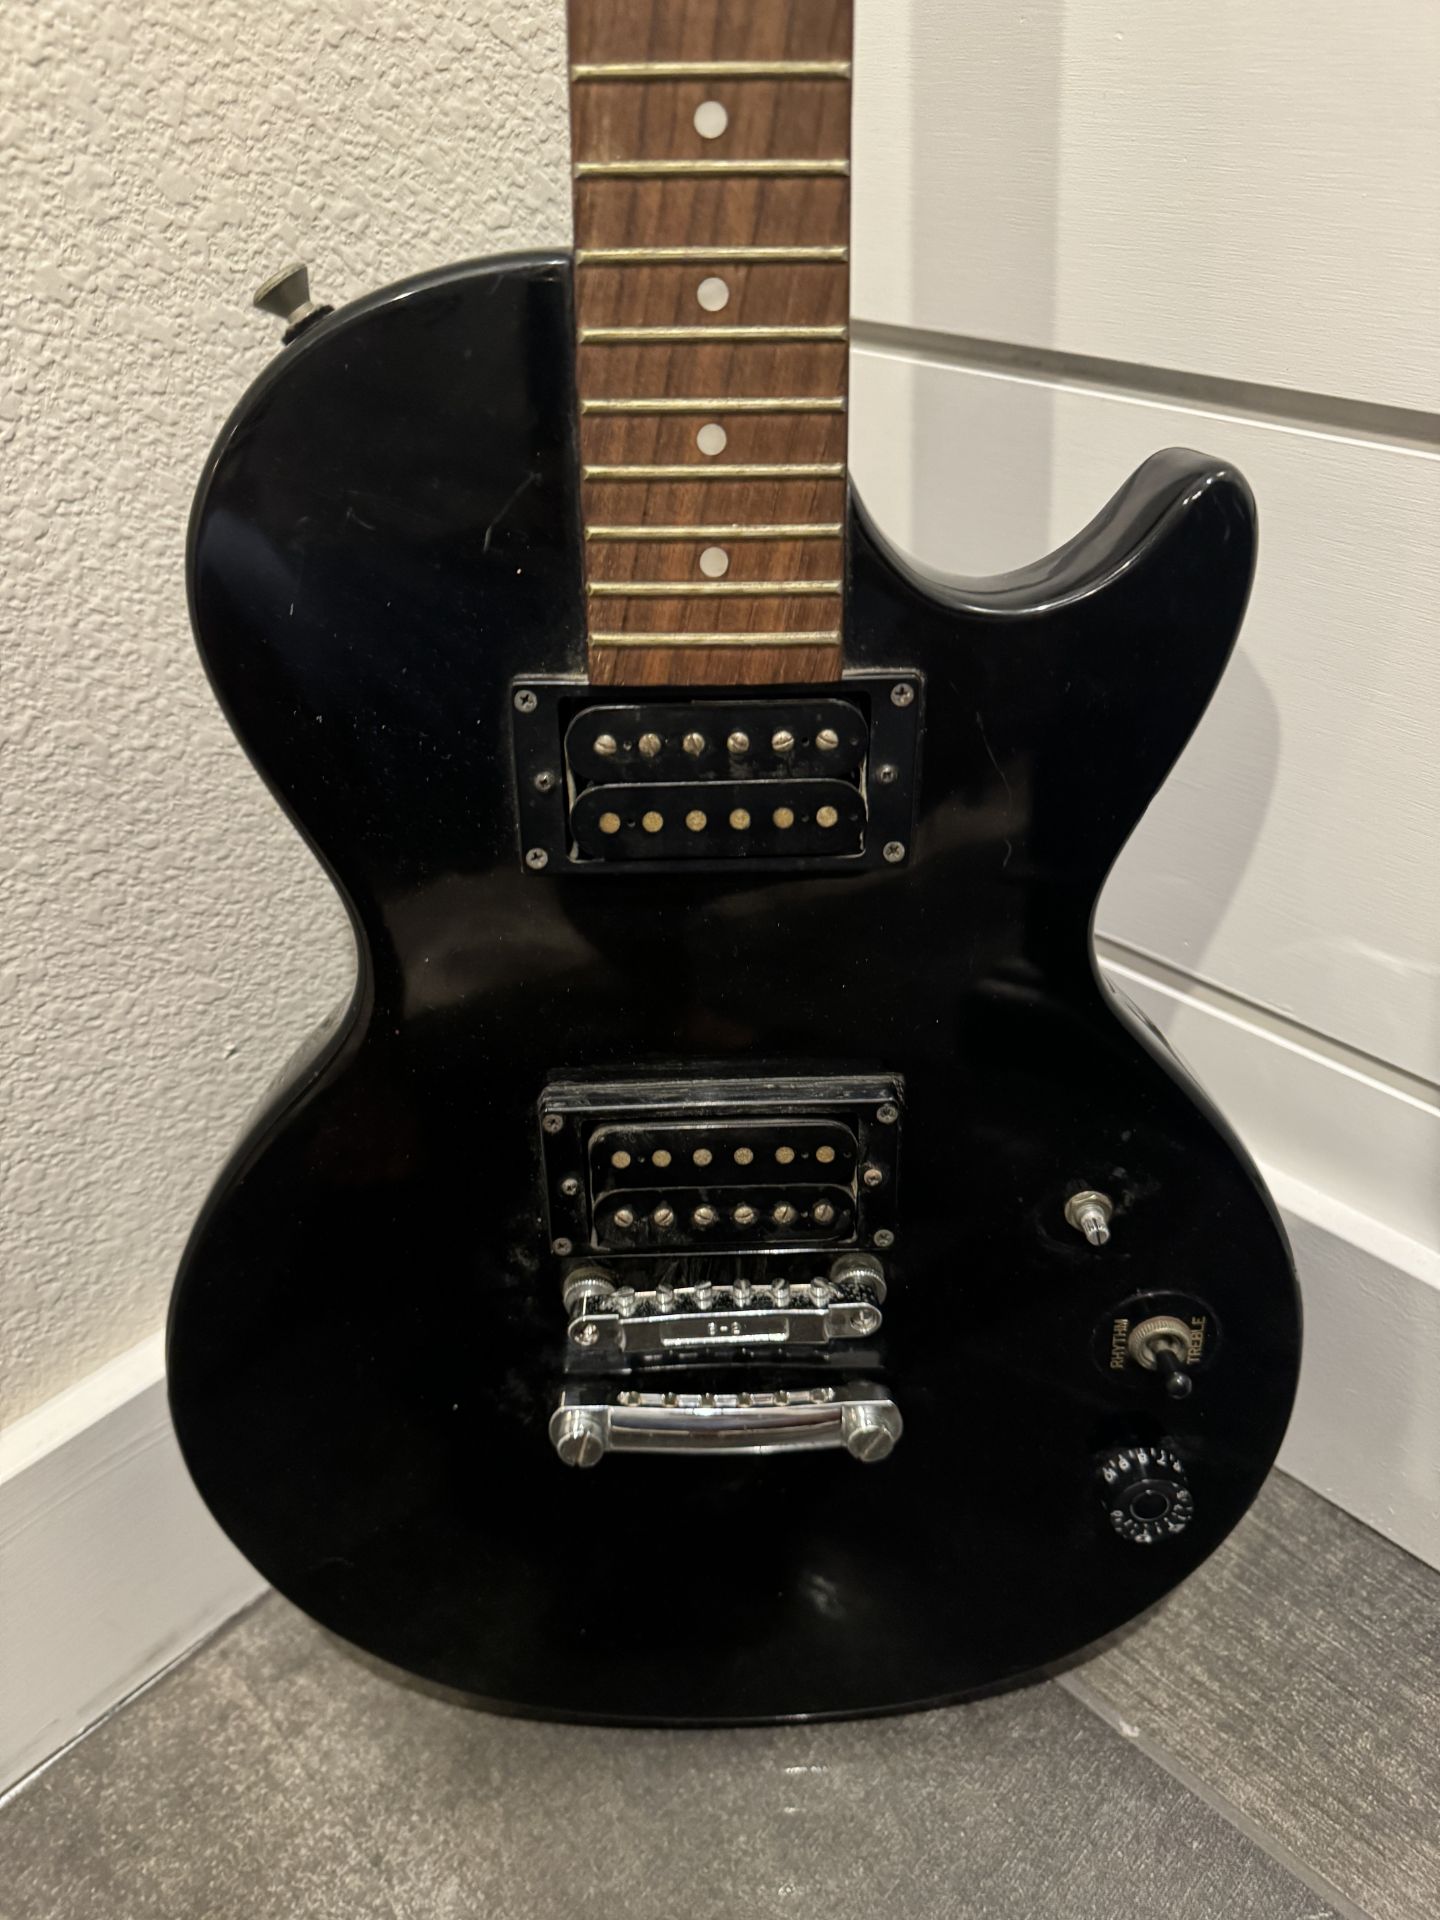 GIBSON SPECIAL MODEL EPIPHONE ELECTRIC GUITAR - Image 3 of 3